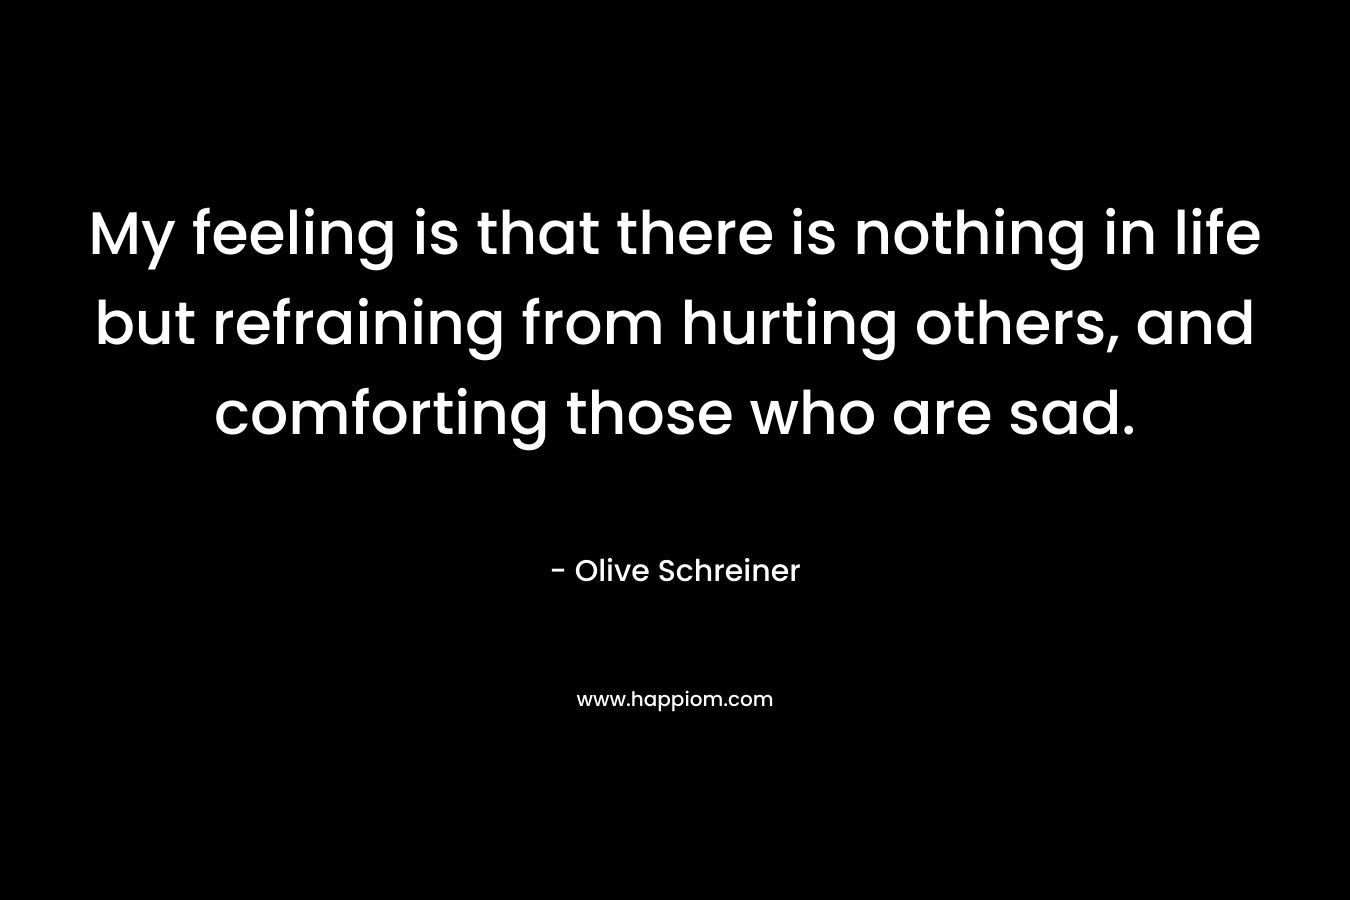 My feeling is that there is nothing in life but refraining from hurting others, and comforting those who are sad. – Olive Schreiner